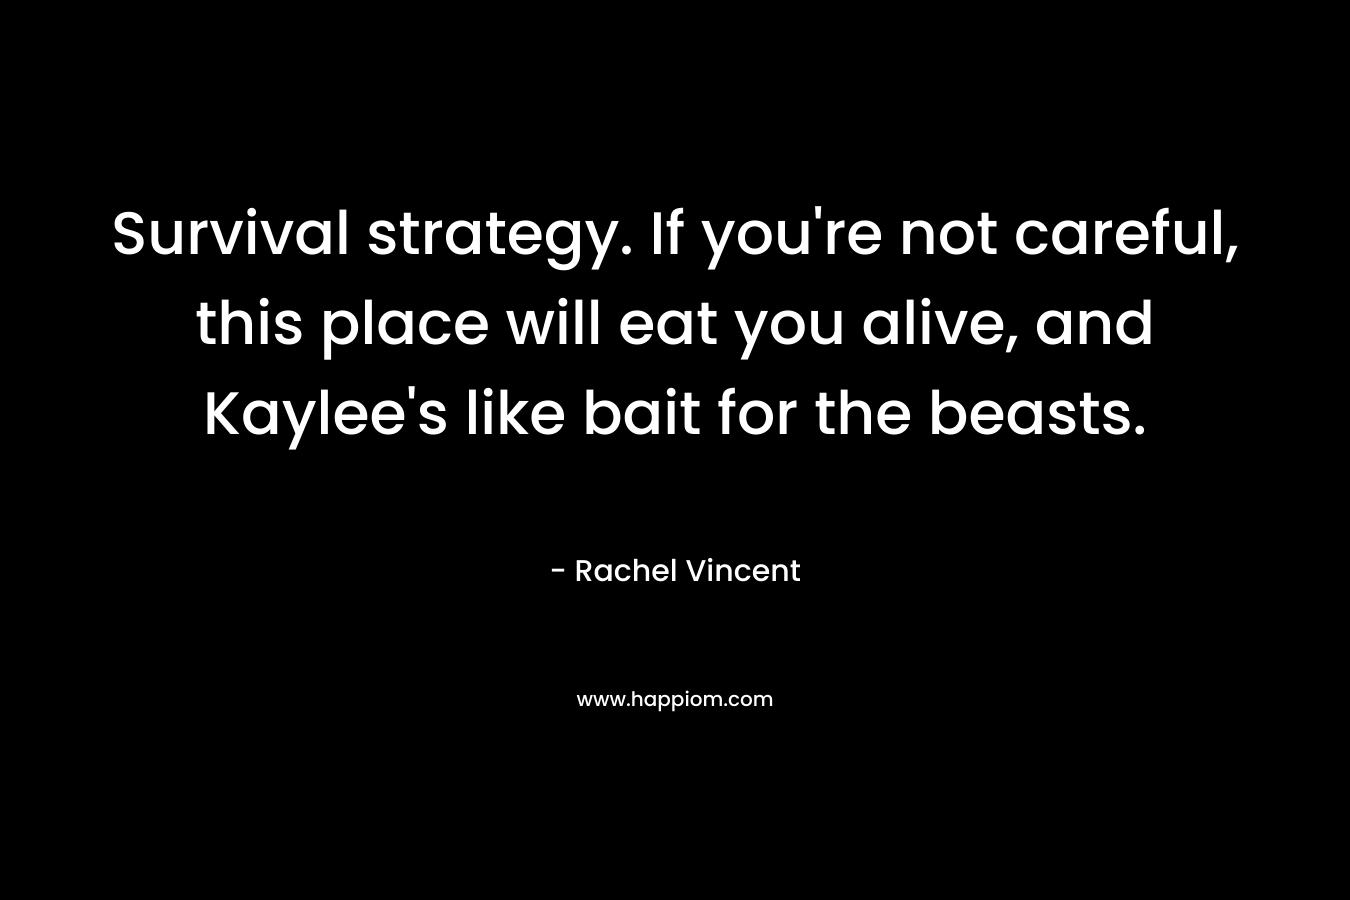 Survival strategy. If you’re not careful, this place will eat you alive, and Kaylee’s like bait for the beasts. – Rachel Vincent